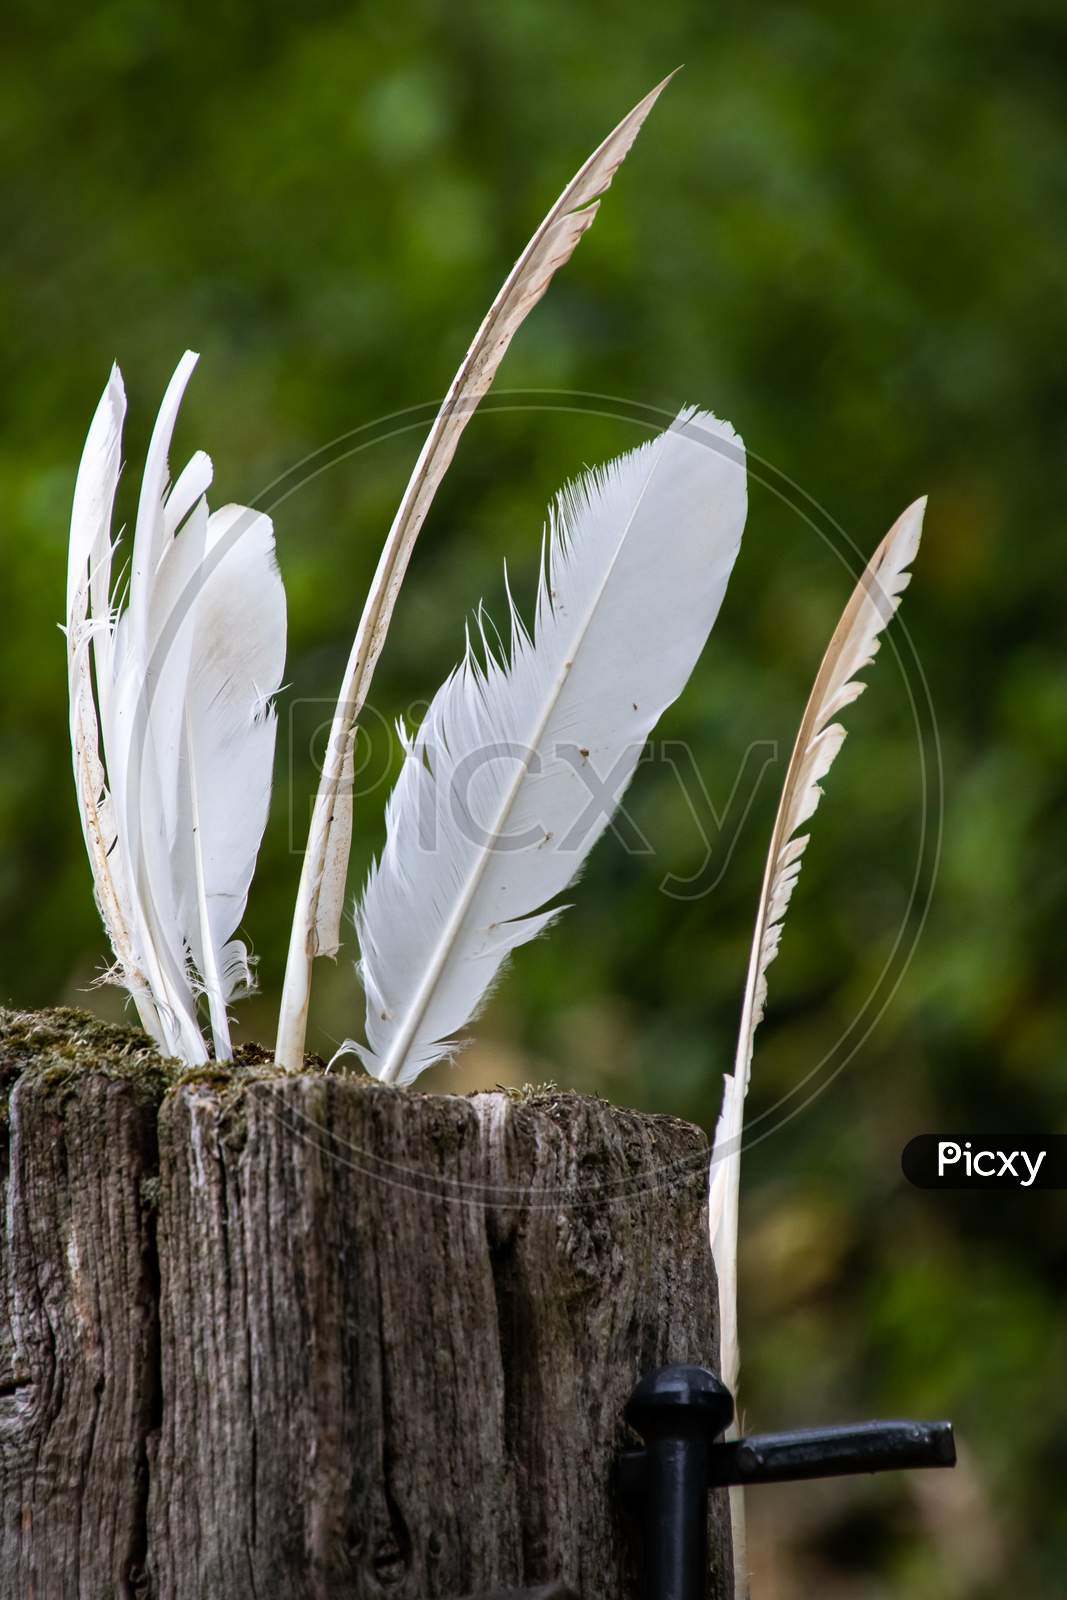 White Feathers Stuck In A Rotting Wooden Gatepost